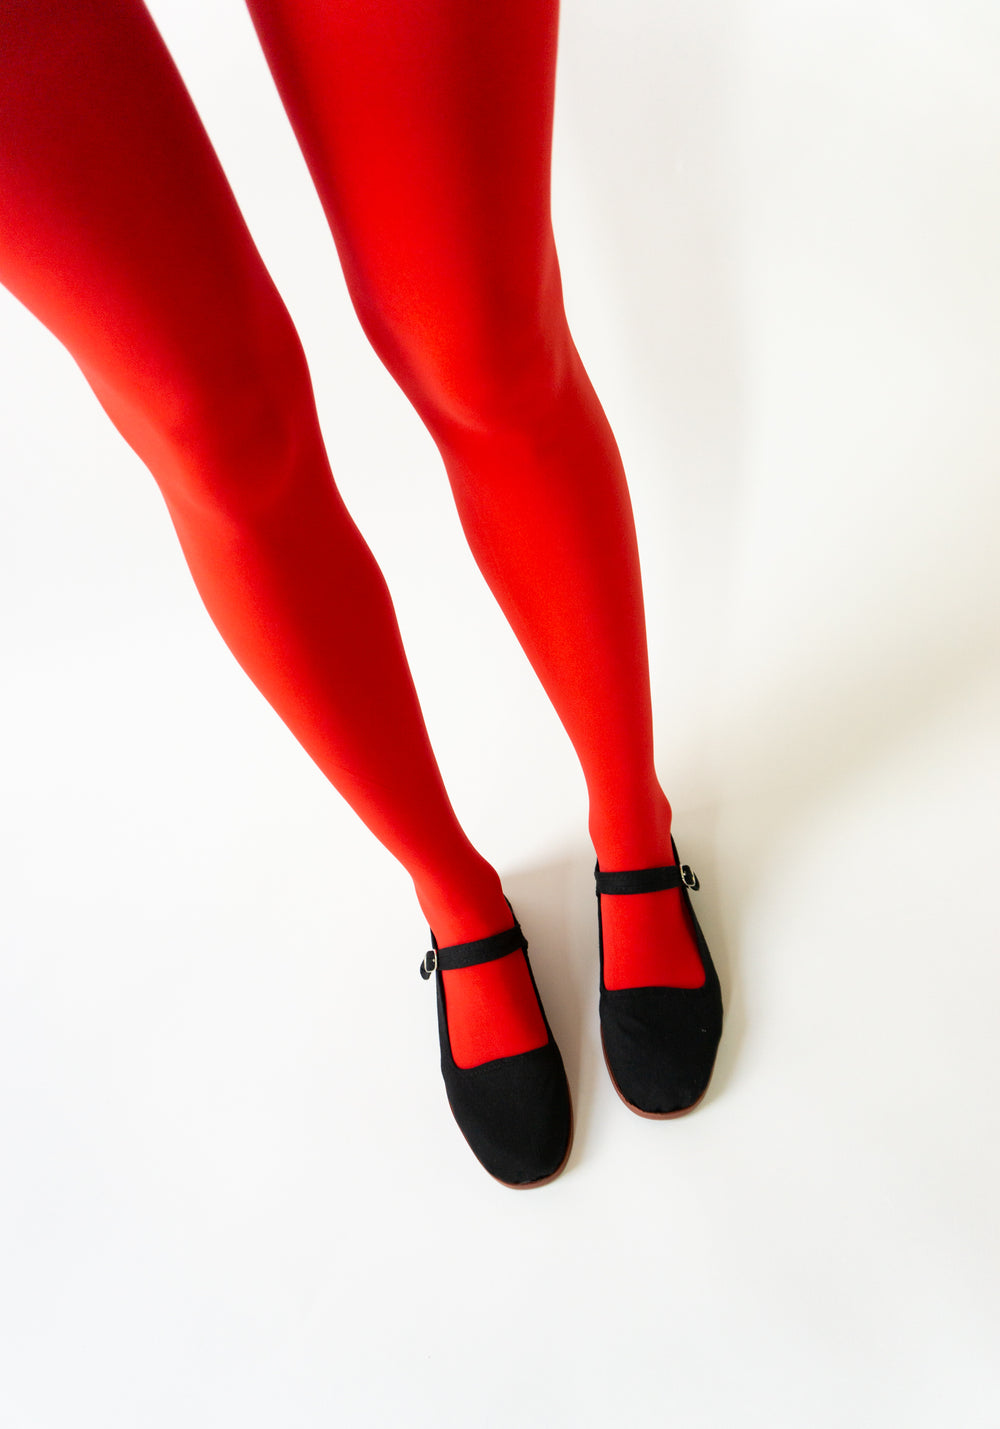 New Red leather ballet shoes and white tights, submissive Jessica